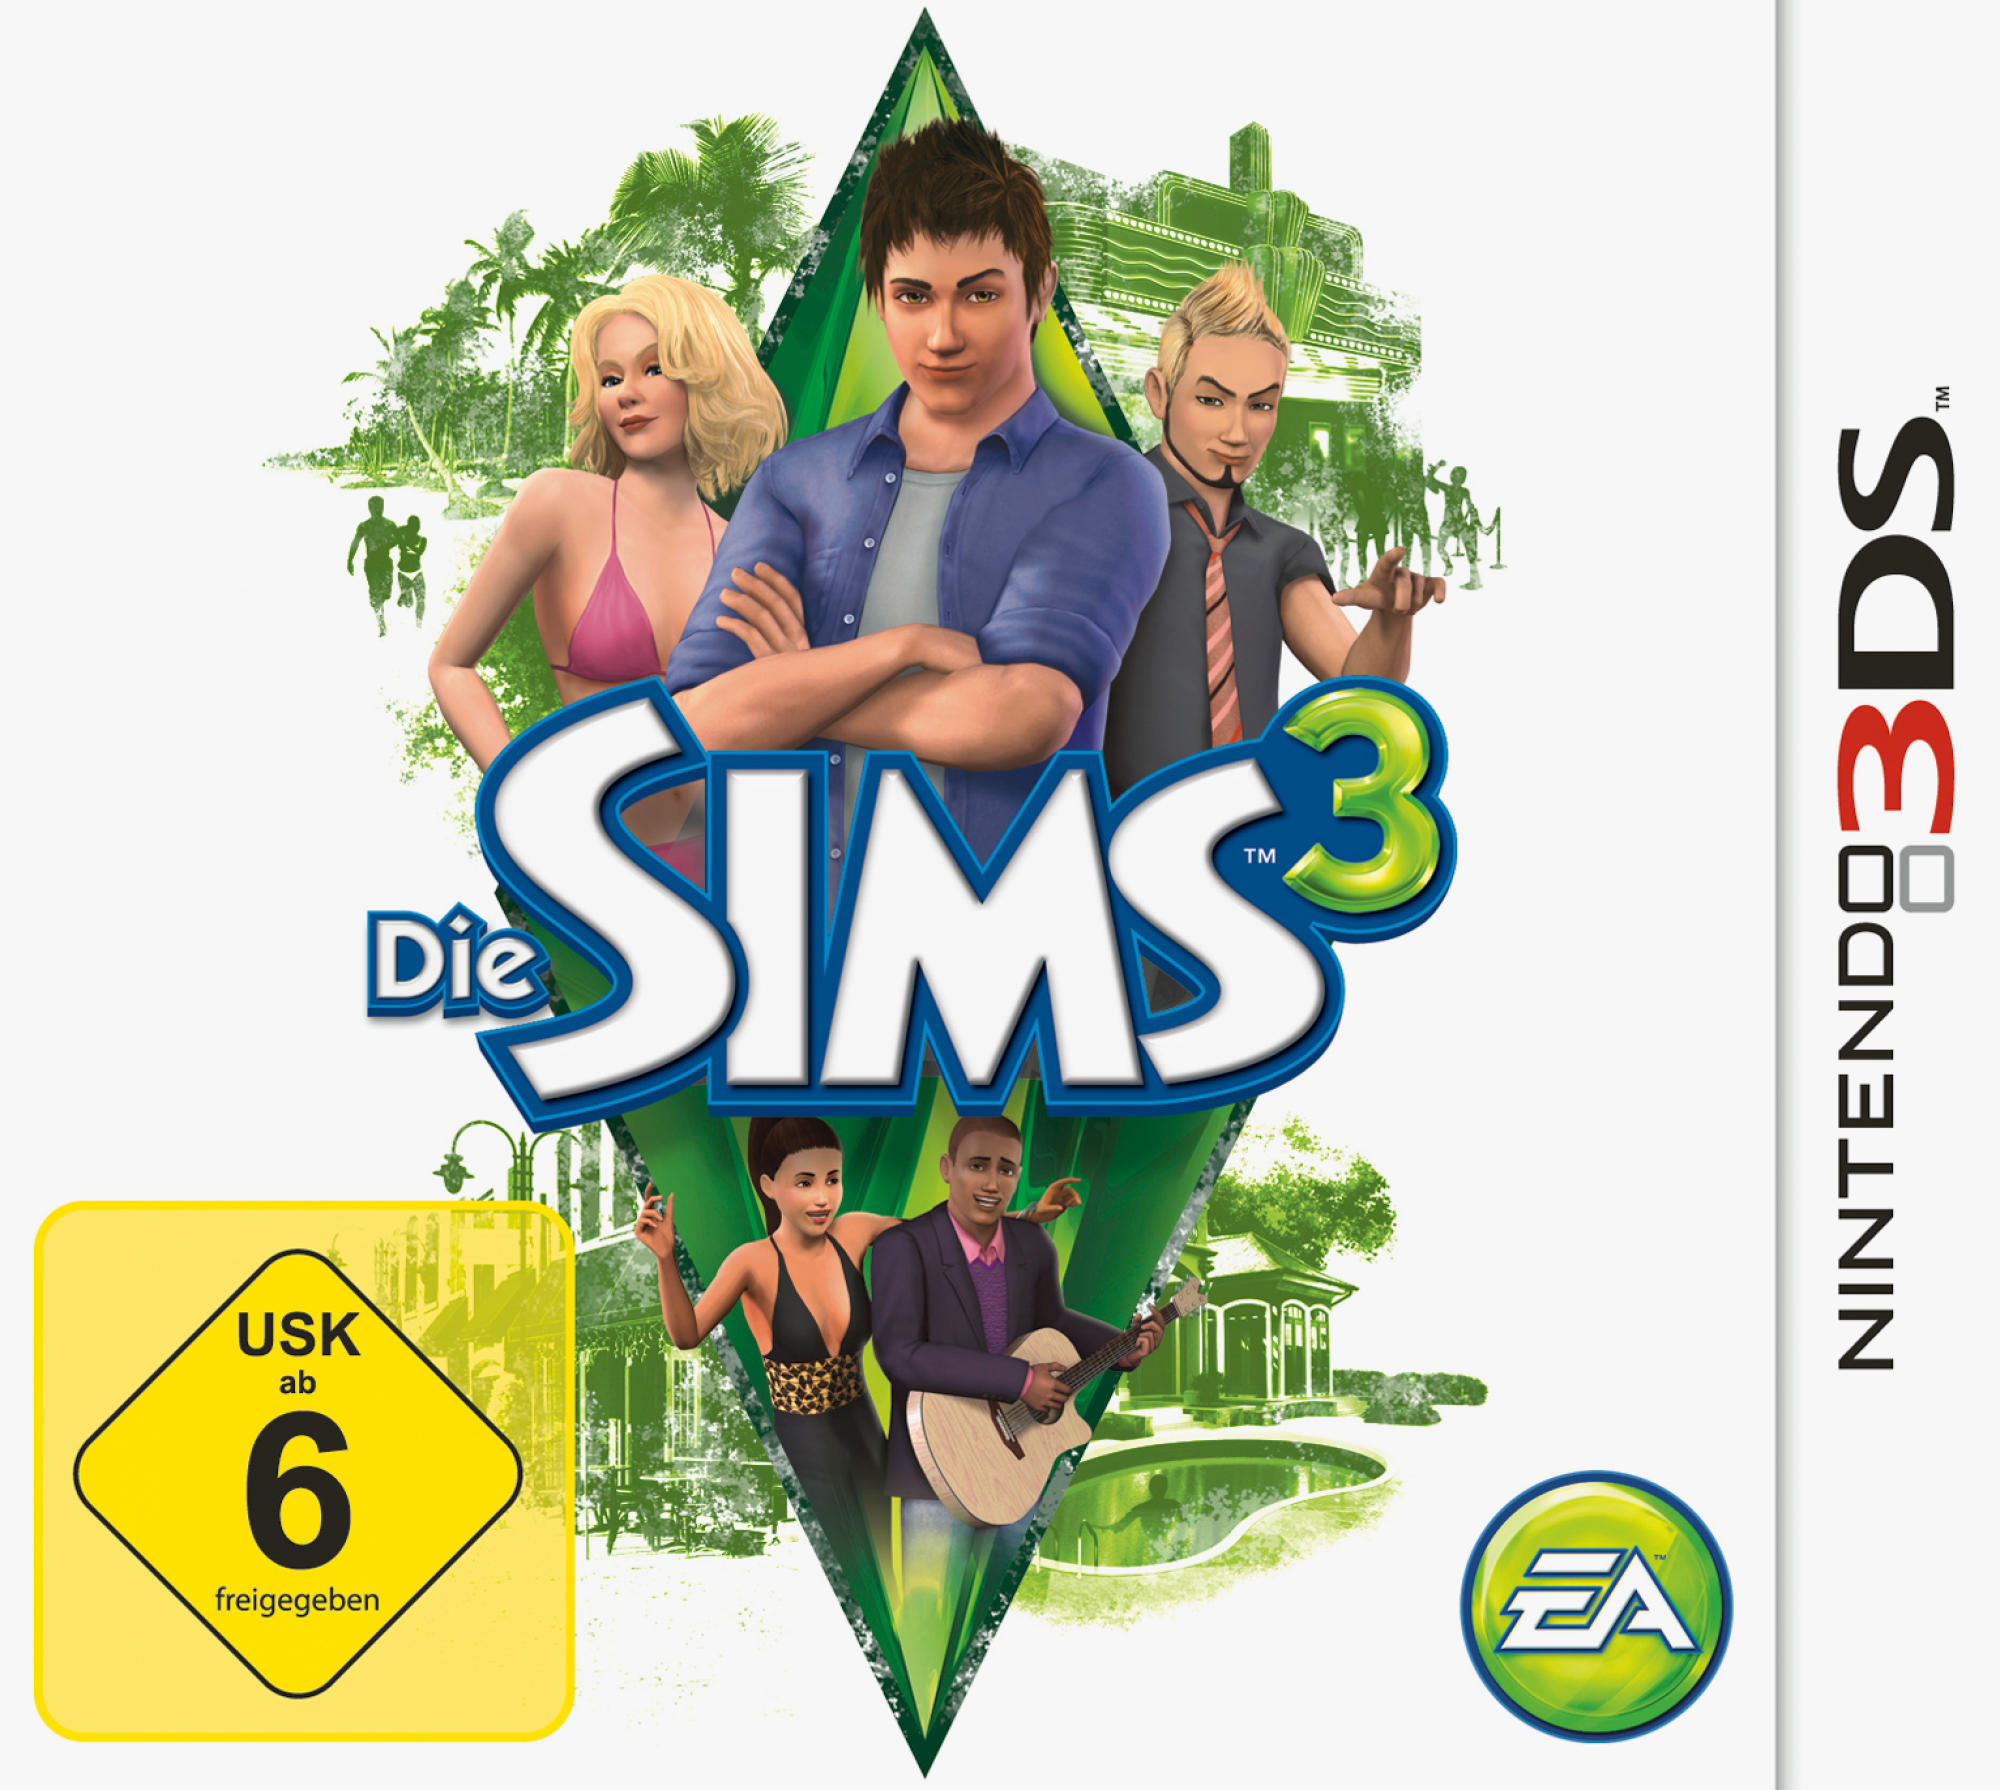 Die Sims 3 (Software Pyramide) - [Nintendo 3DS